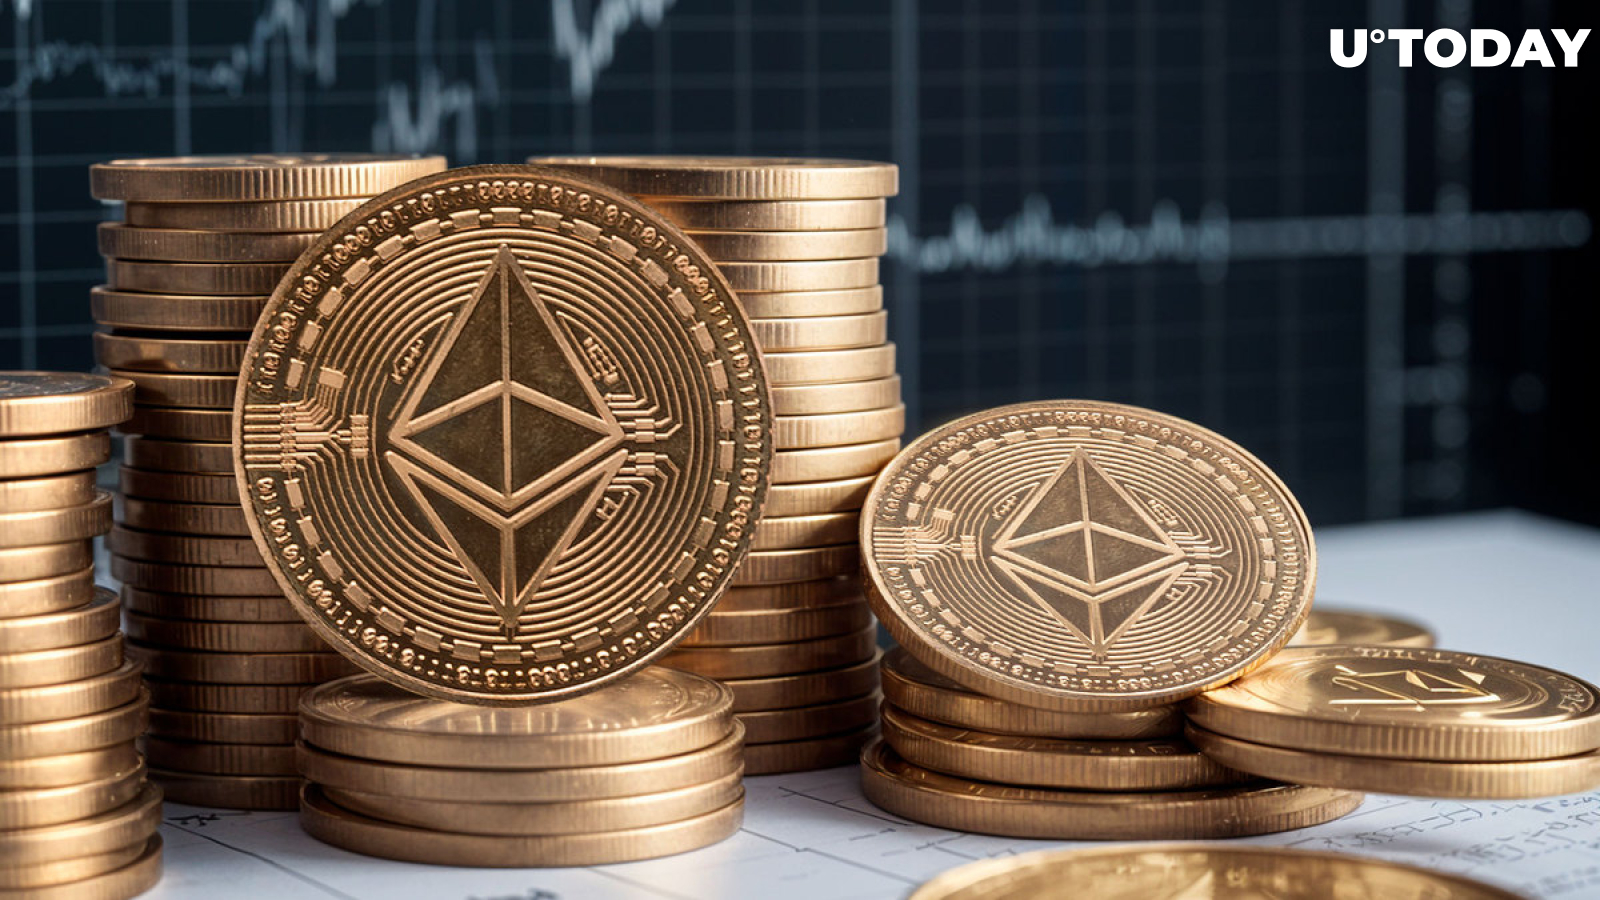 Bernstein Predicts Ethereum to $6,600, But There's a Catch